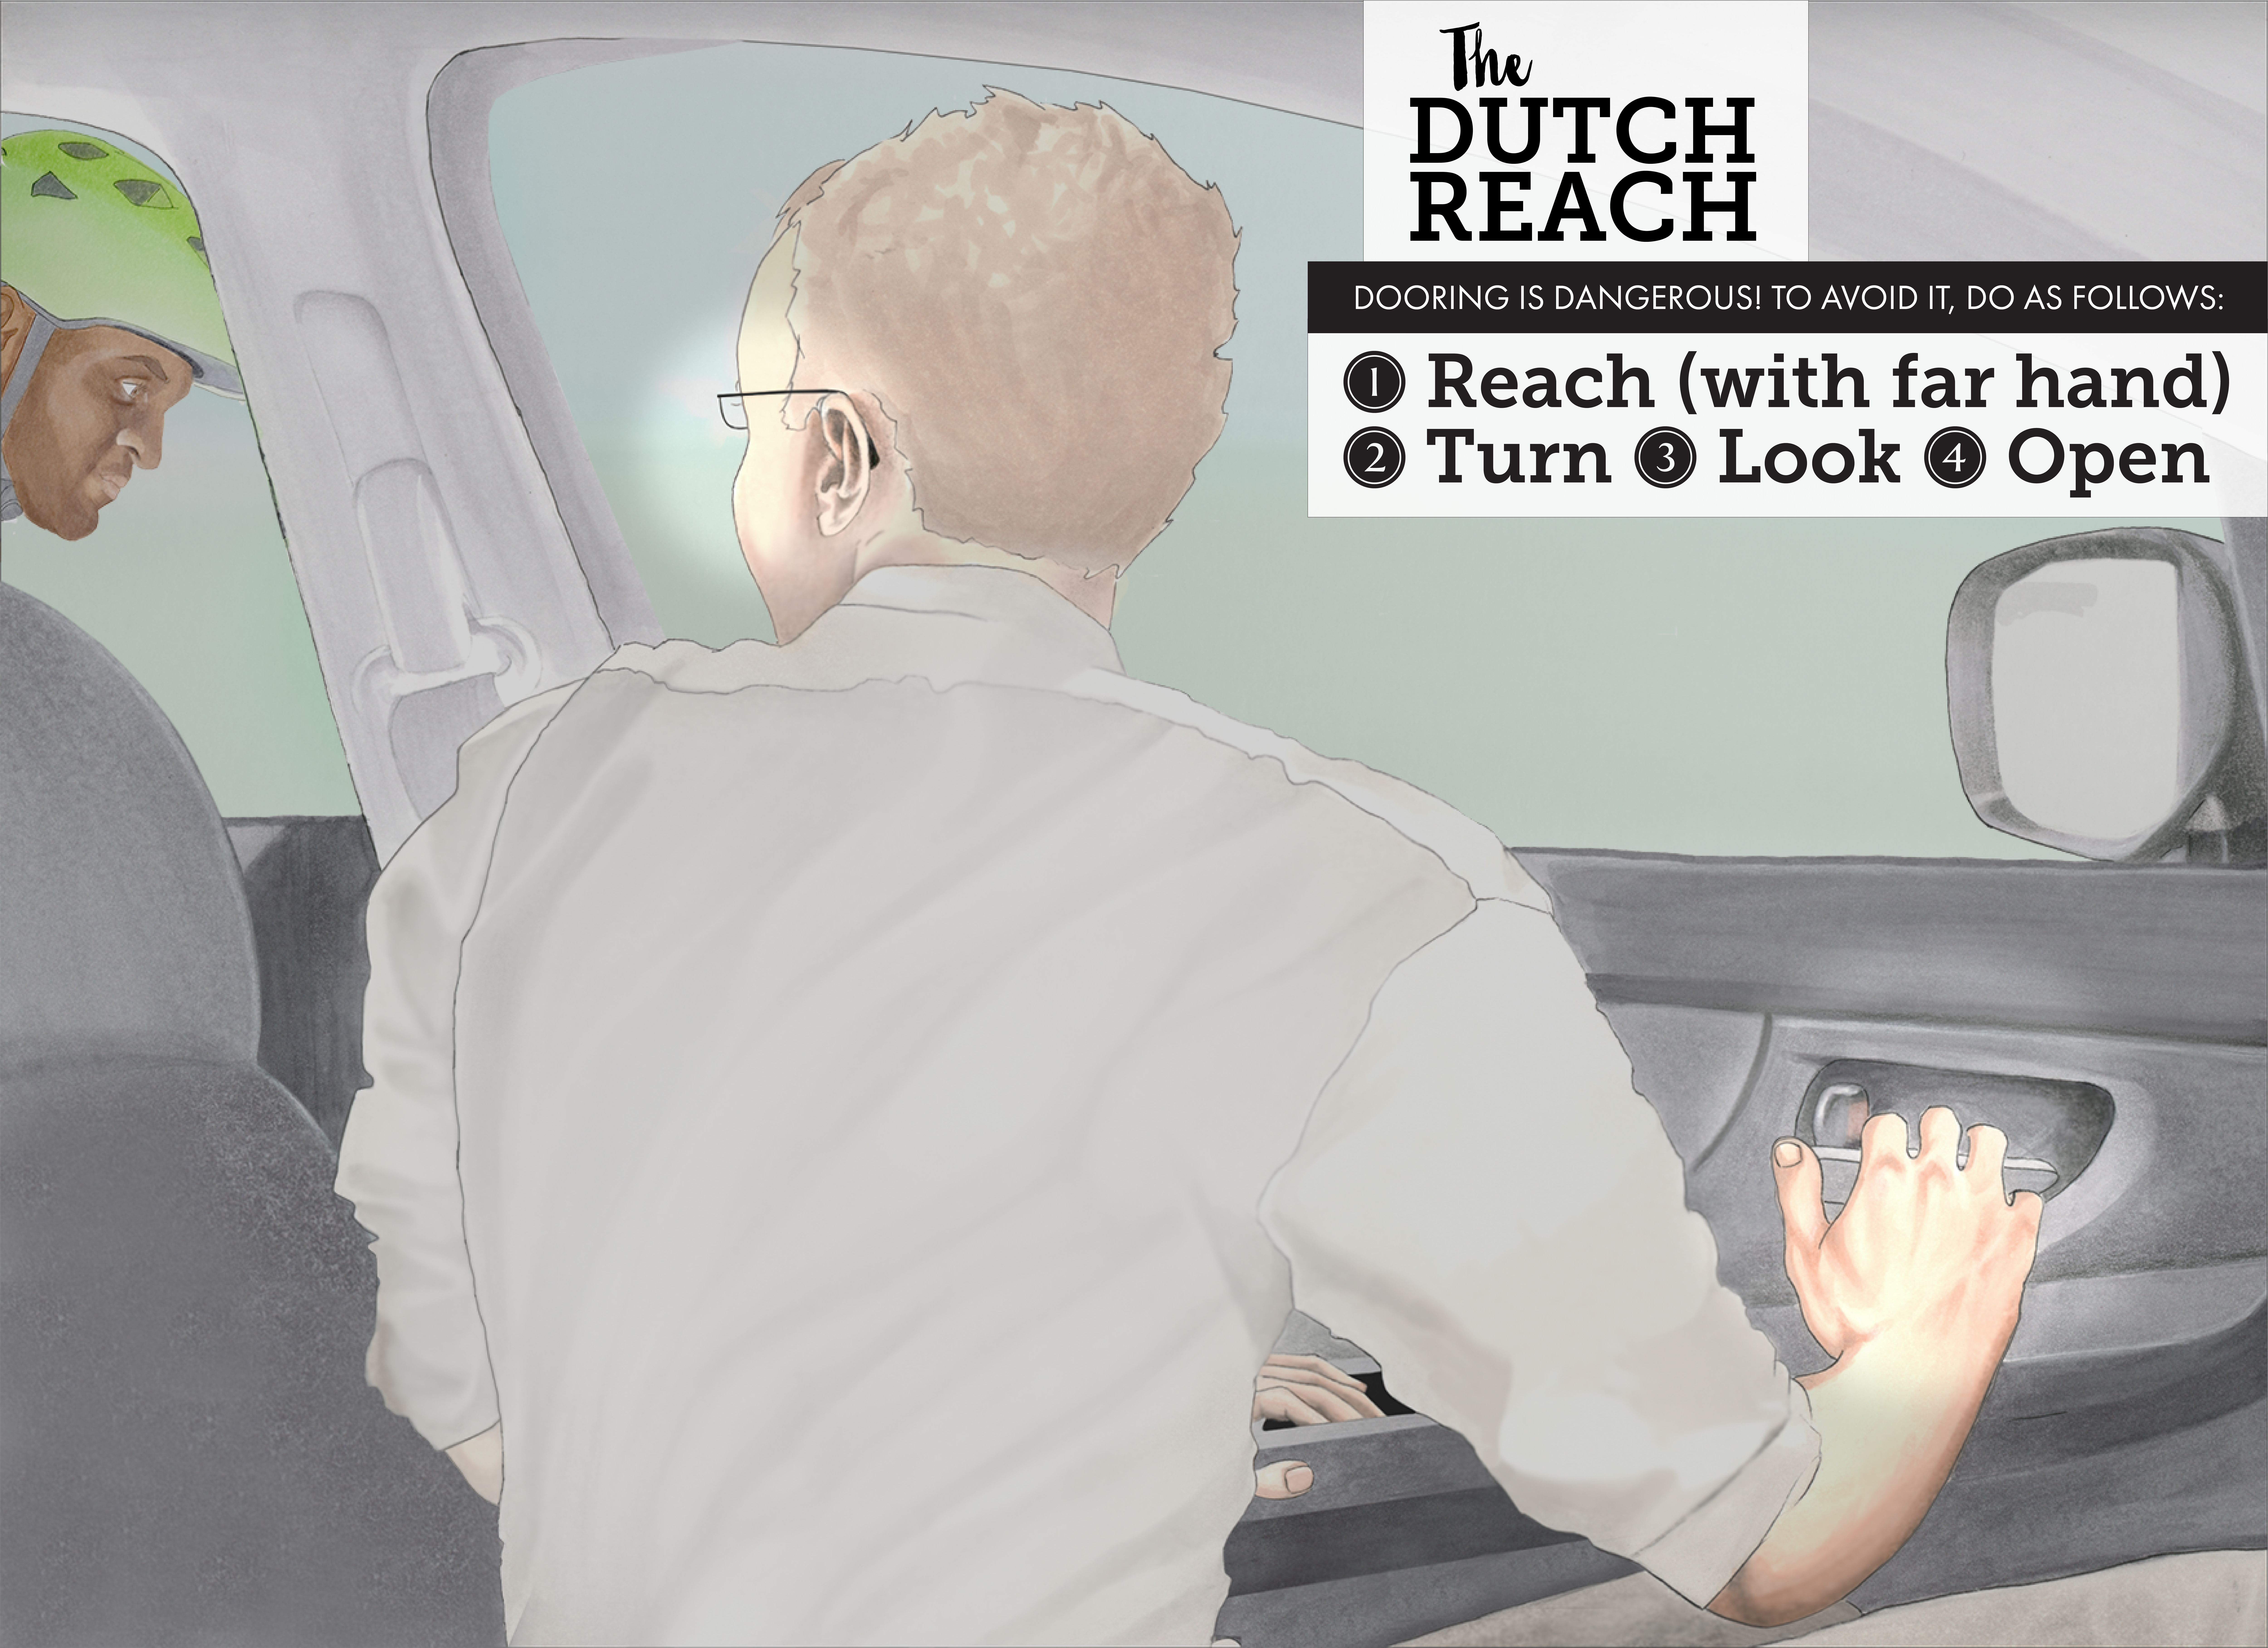 Image shows a car occupant, driver or passenger depending on the country's driving side, righ6t hand on door latch, upper torso swiveled a quarter turn left and head turned further to face back and look out the left window where he sees a cyclist's face and helmet about to pass his door. Image has caption in frame which summarizes the Dutch Reach method: Reach (with far hand), Turn, Look, Open.